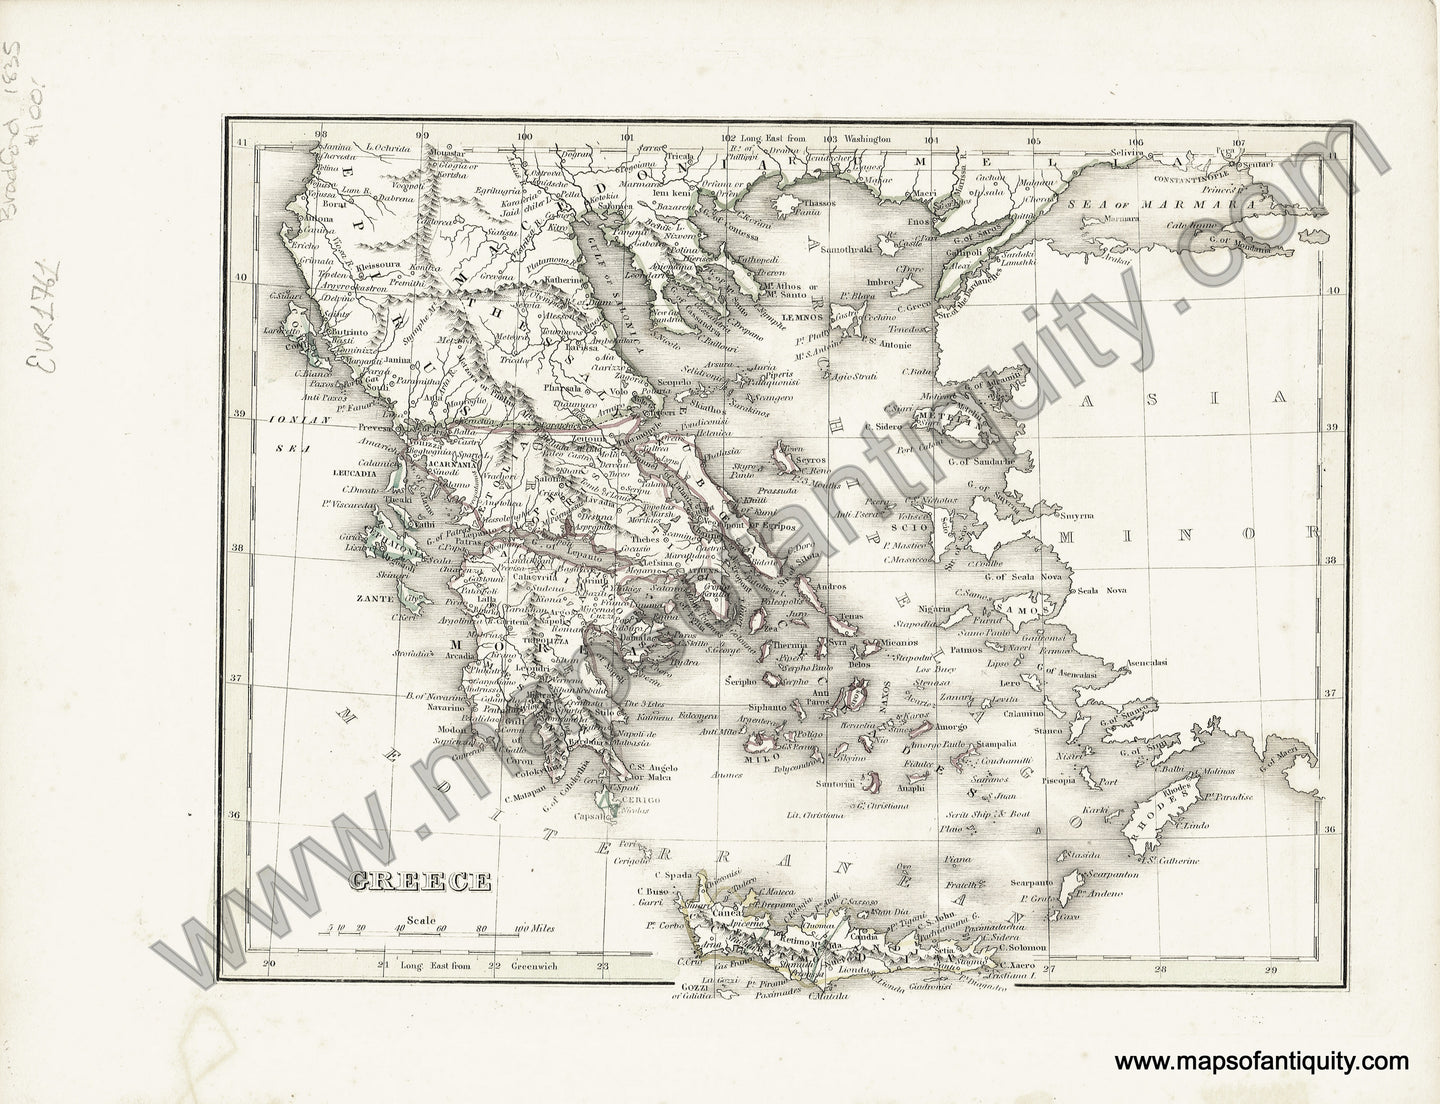 Antique-Hand-Colored-Map-Greece-Europe-Greece-&-the-Balkans-1835-T.G.-Bradford-Maps-Of-Antiquity